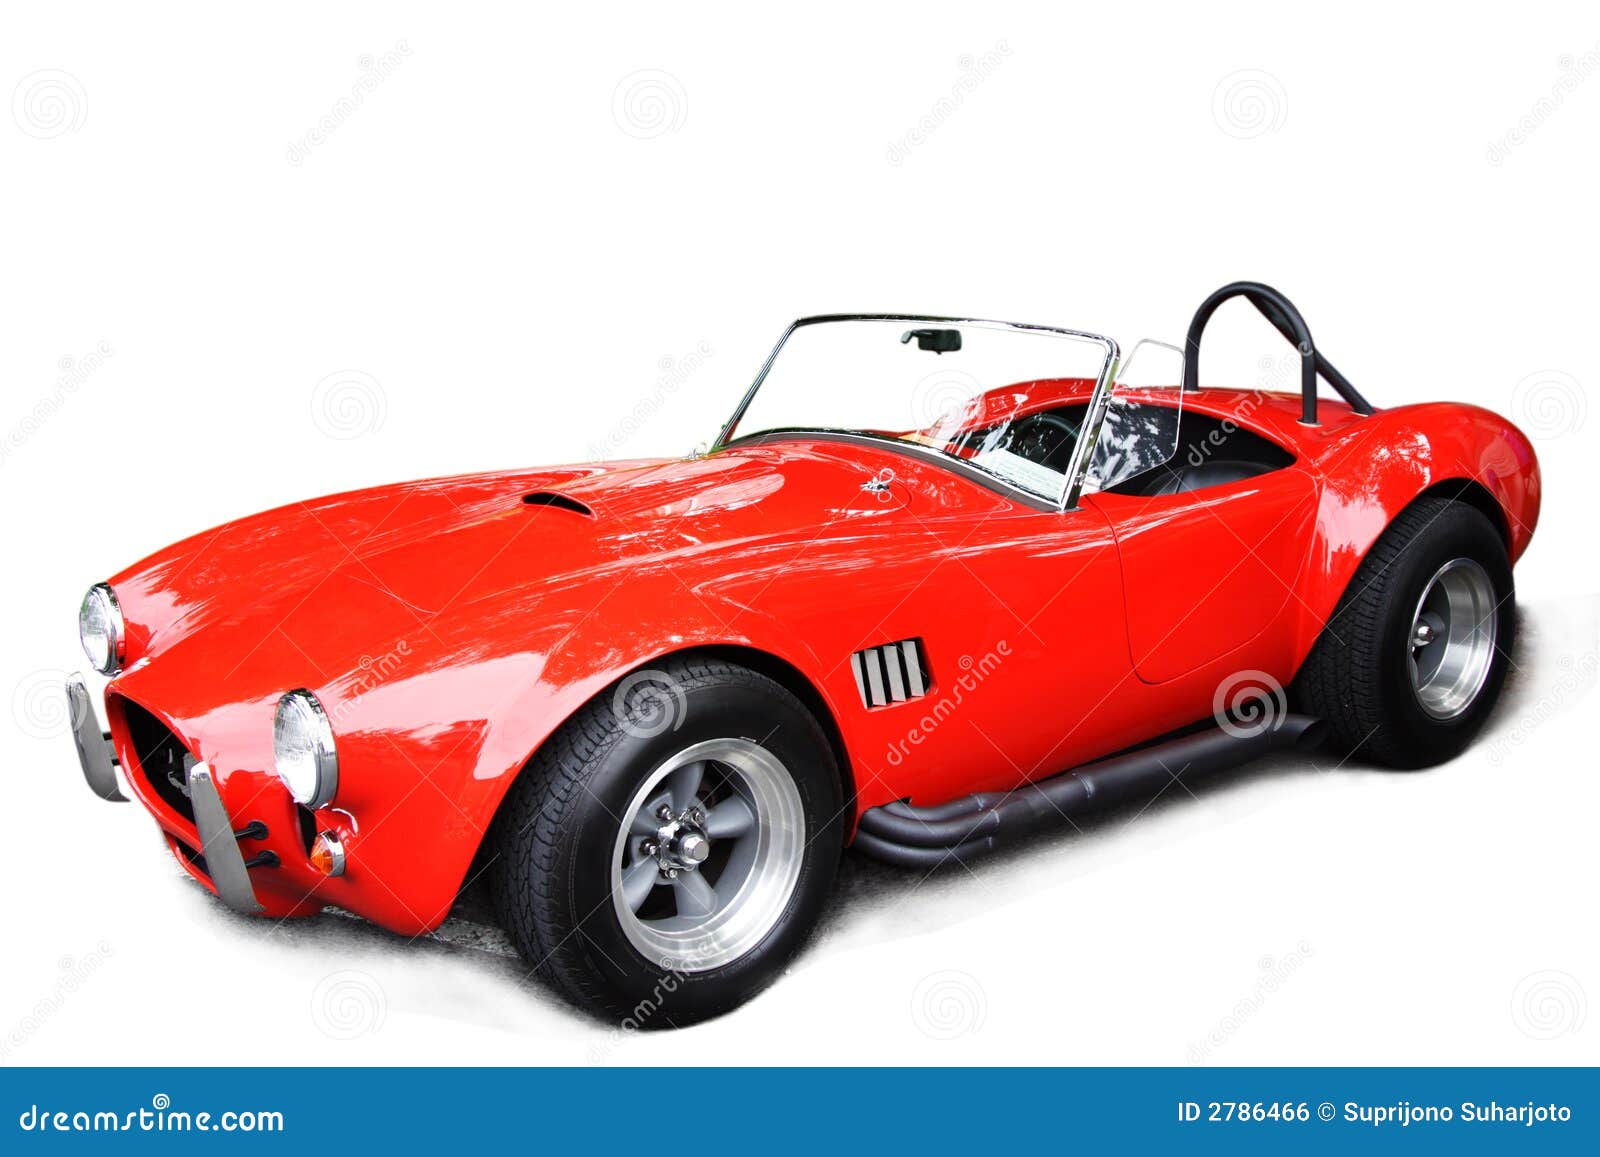 Classic Sport Car Royalty Free Stock Image  Image: 2786466